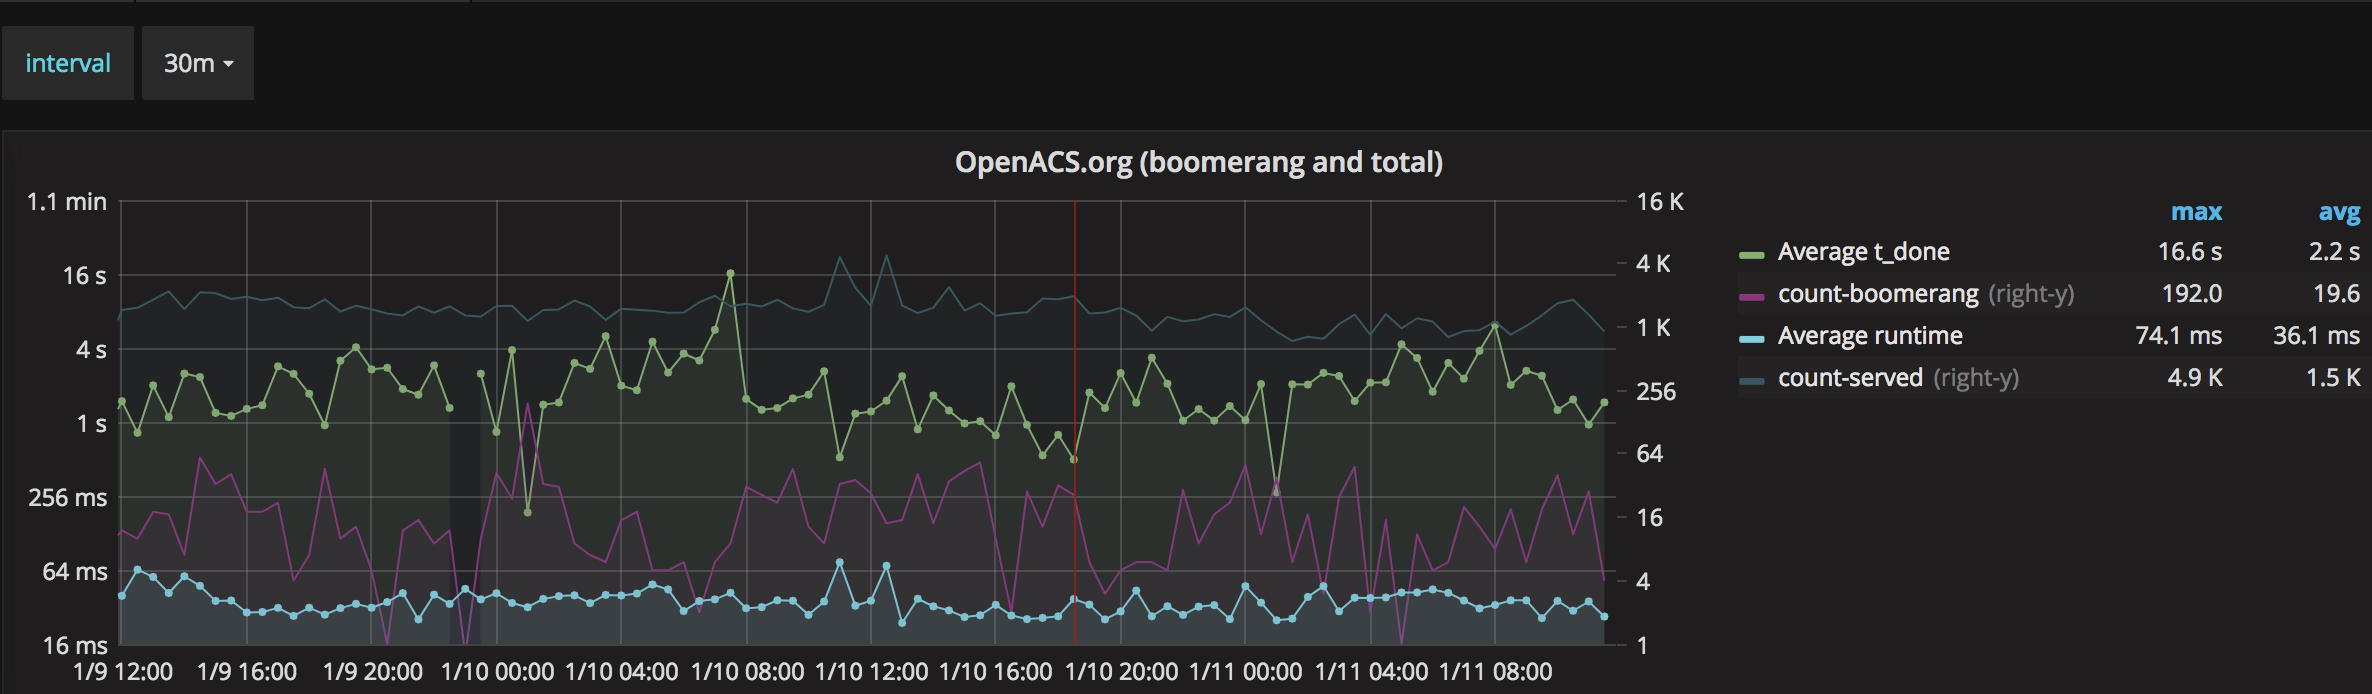 OpenACS performance 2 days